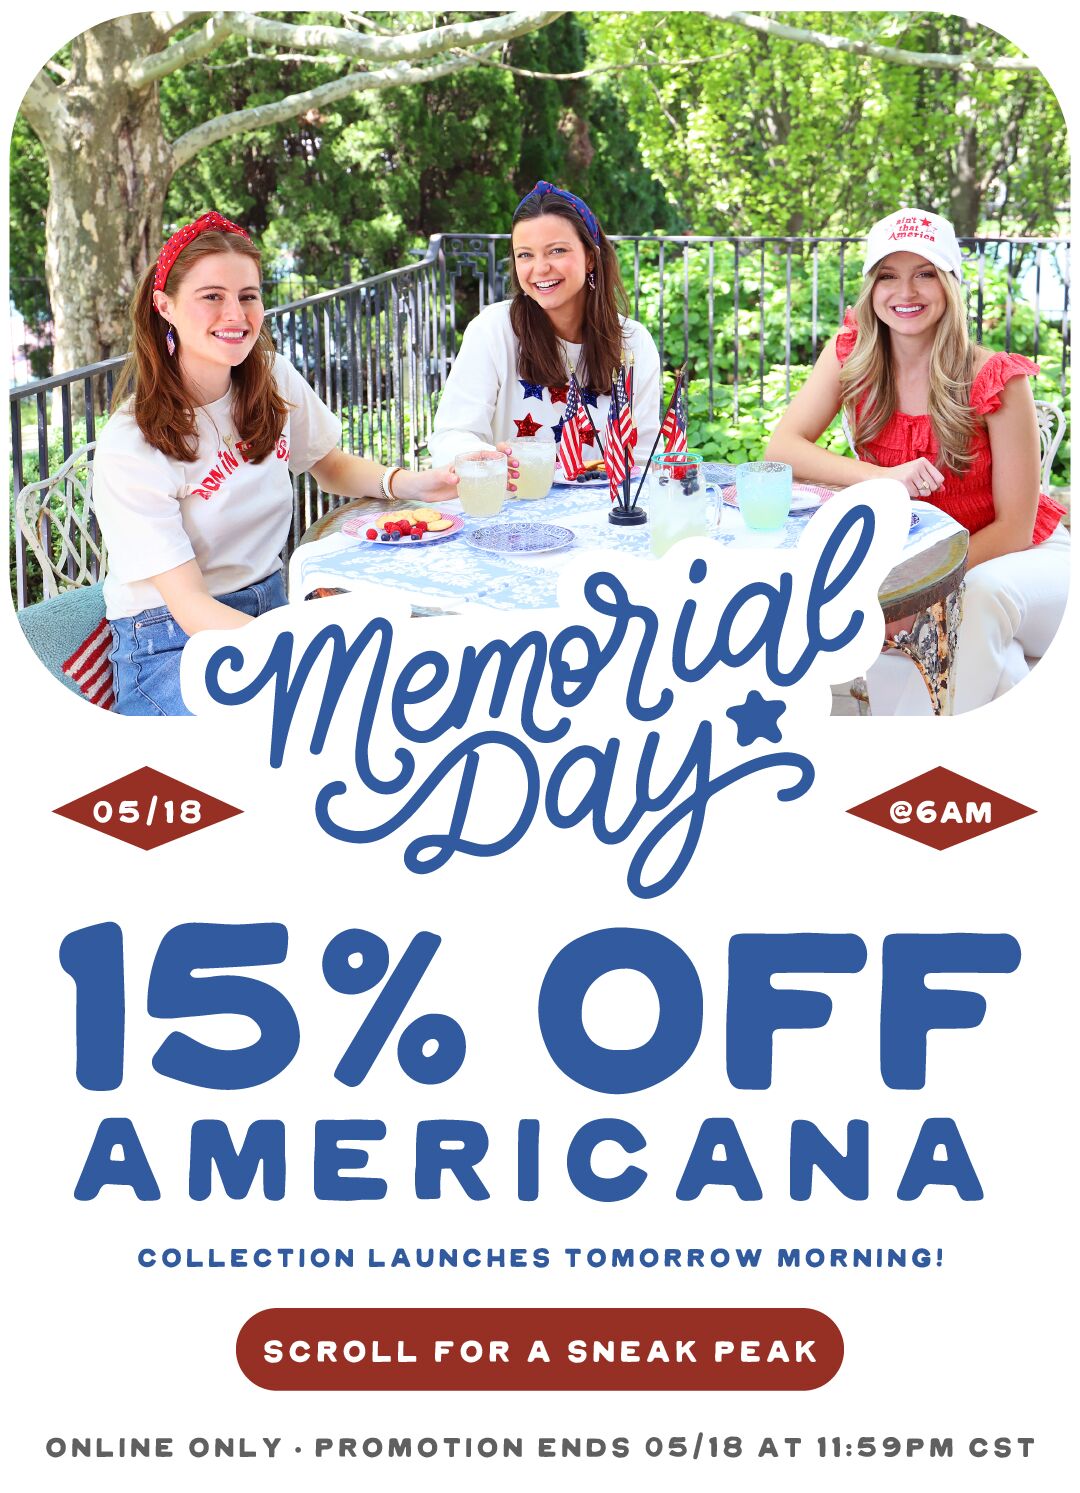  AMERICANA COLLECTION LAUNCHES TOMORROW MORNING! SCROLL FOR A SNEAK PEAK ONLINE ONLY - PROMOTION ENDS 0518 AT 11:59PM CST 